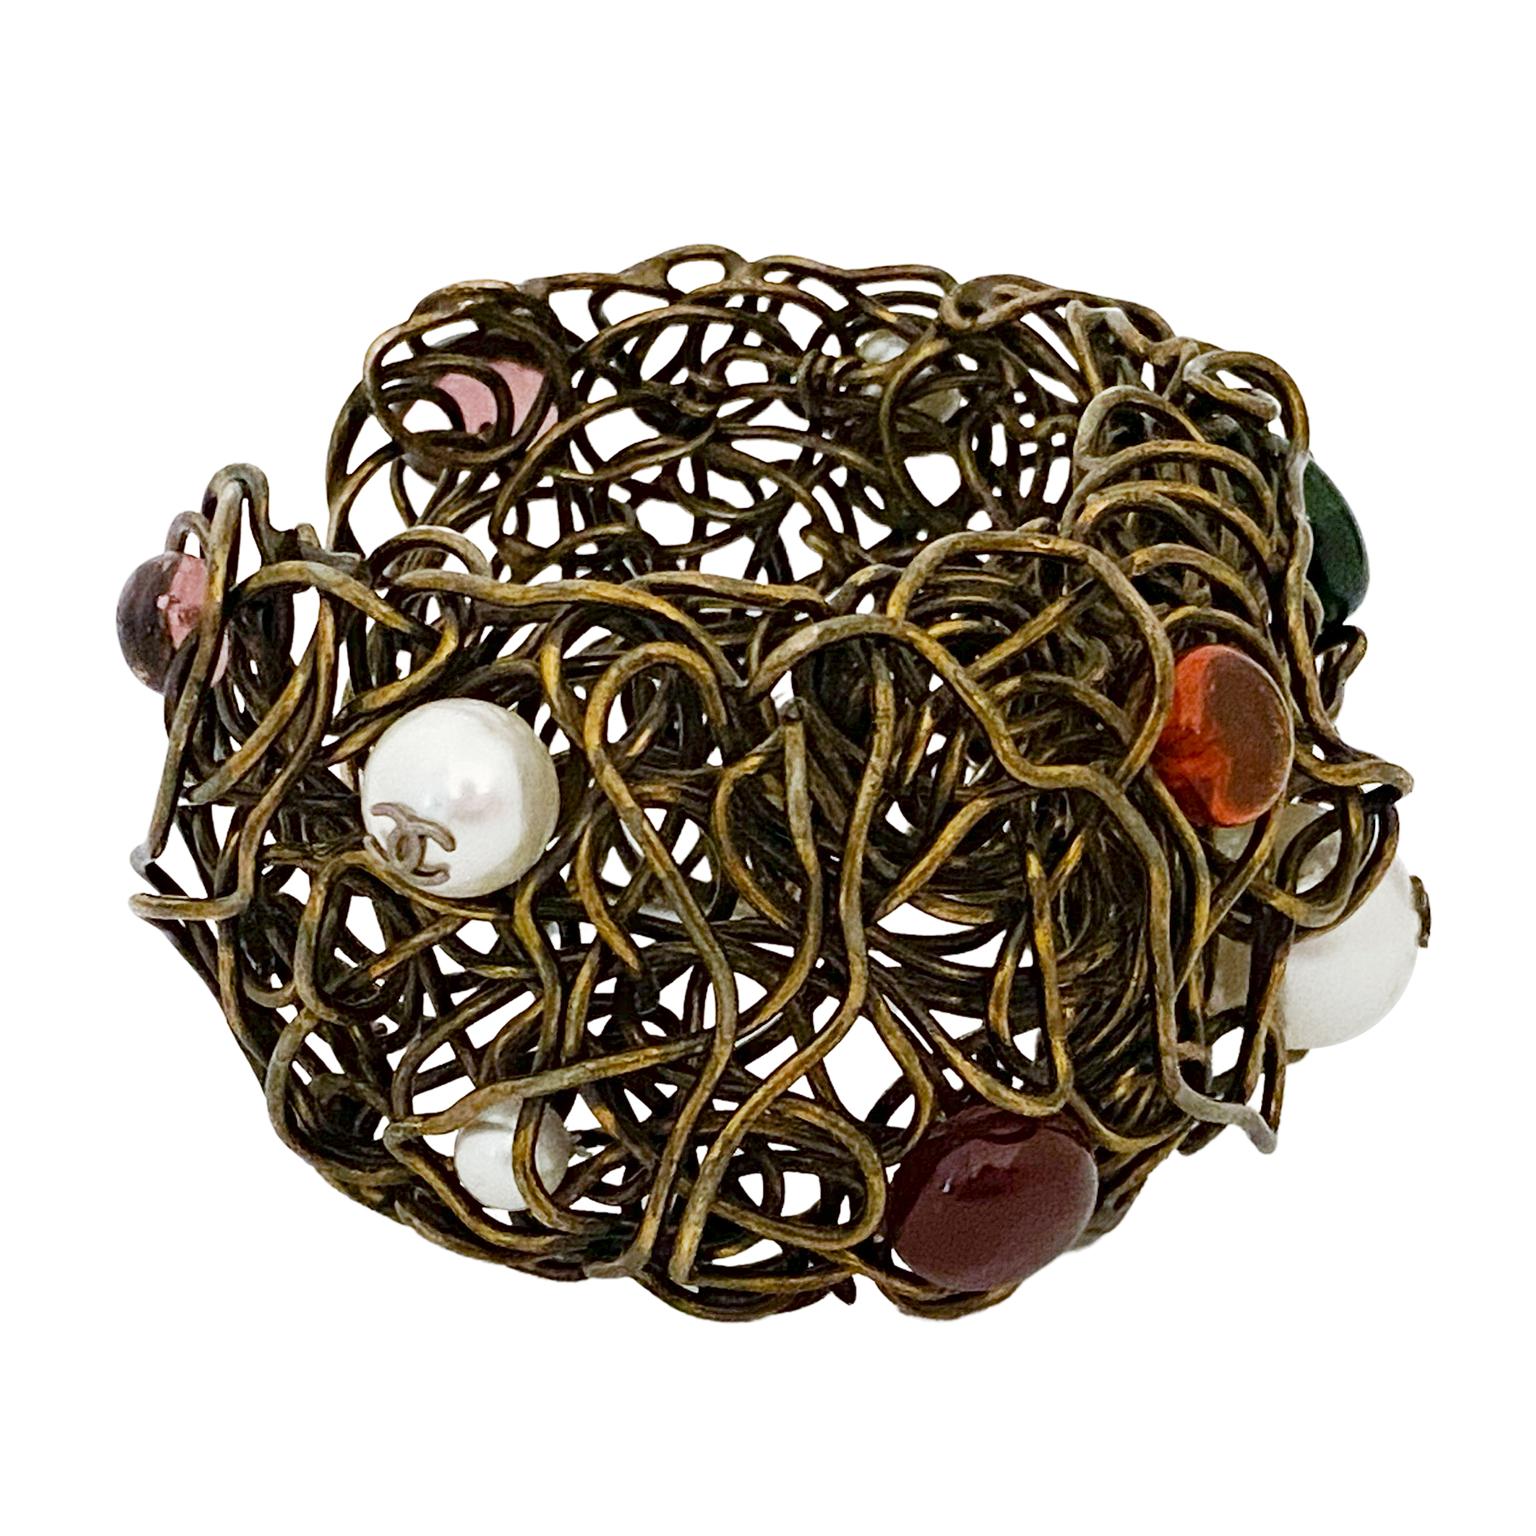 Interesting and unique 1980s birds nest style Chanel cuff. Brass tone metal wire abstractly designed and molded into a cuff. Embellished with dark red, dark green, purple and yellow poured glass cabochons. Three pearls with Chanel CC logos.